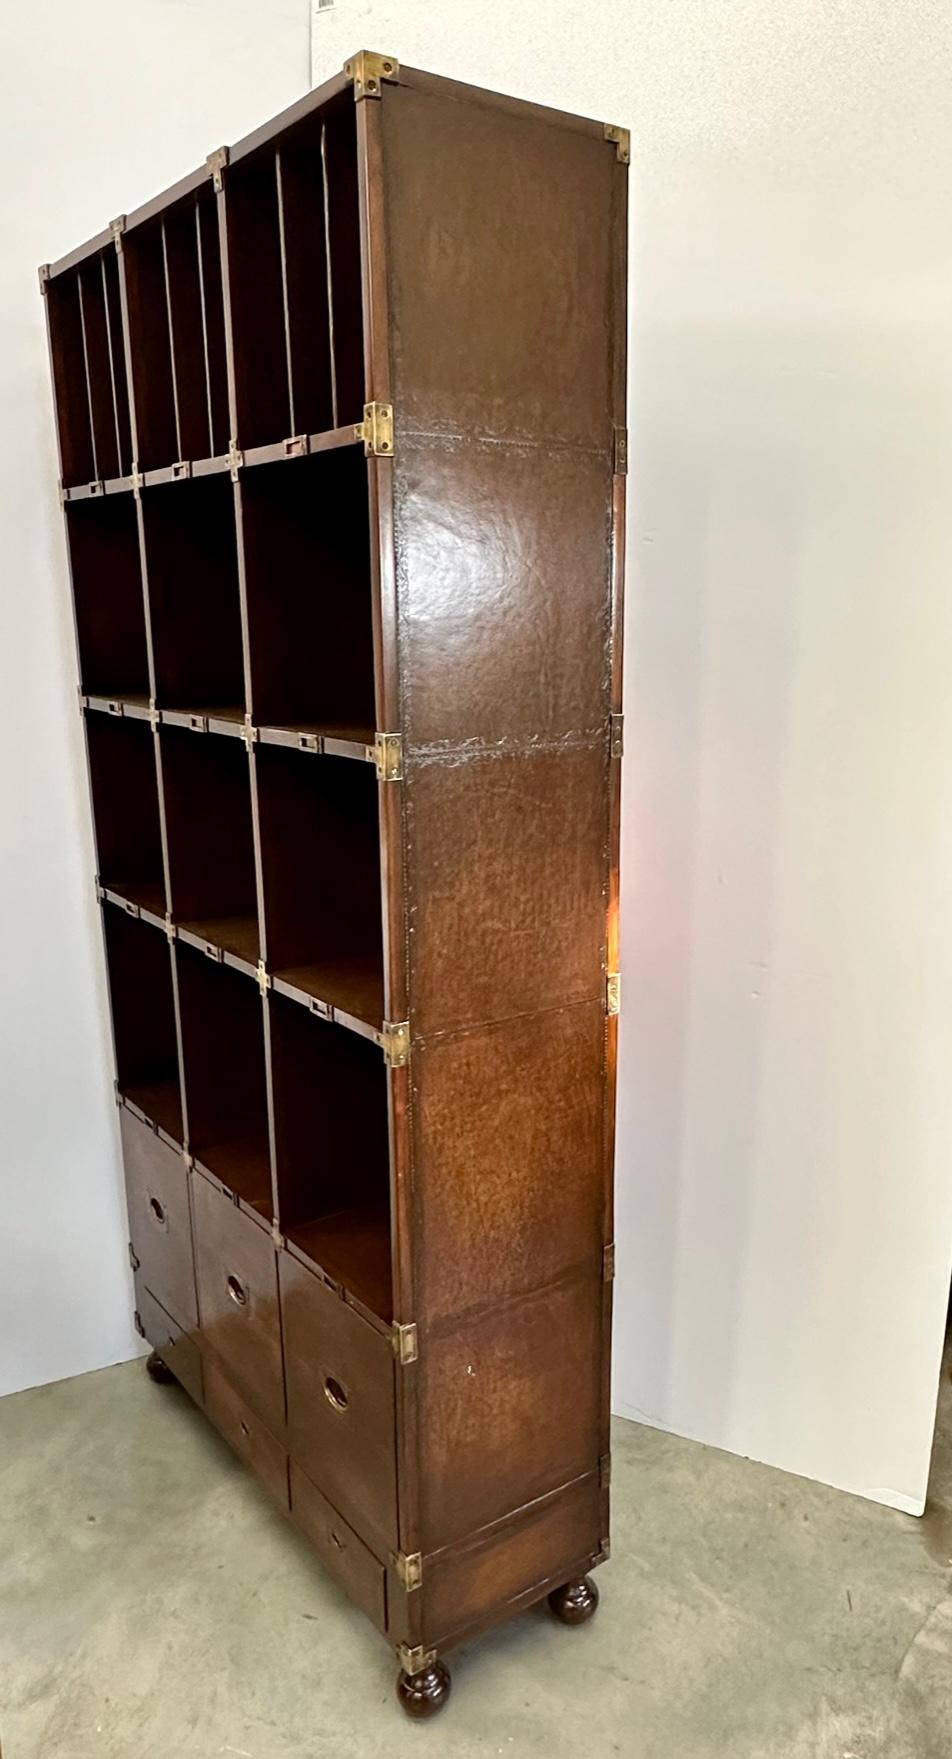 Stunning large leather wrapped bookcase attributed to Theodore Alexander having his signature embossed leather decoration on the sides. Super functional for display and storage having 6 drawers at the bottom and 9 cubbies that are 12